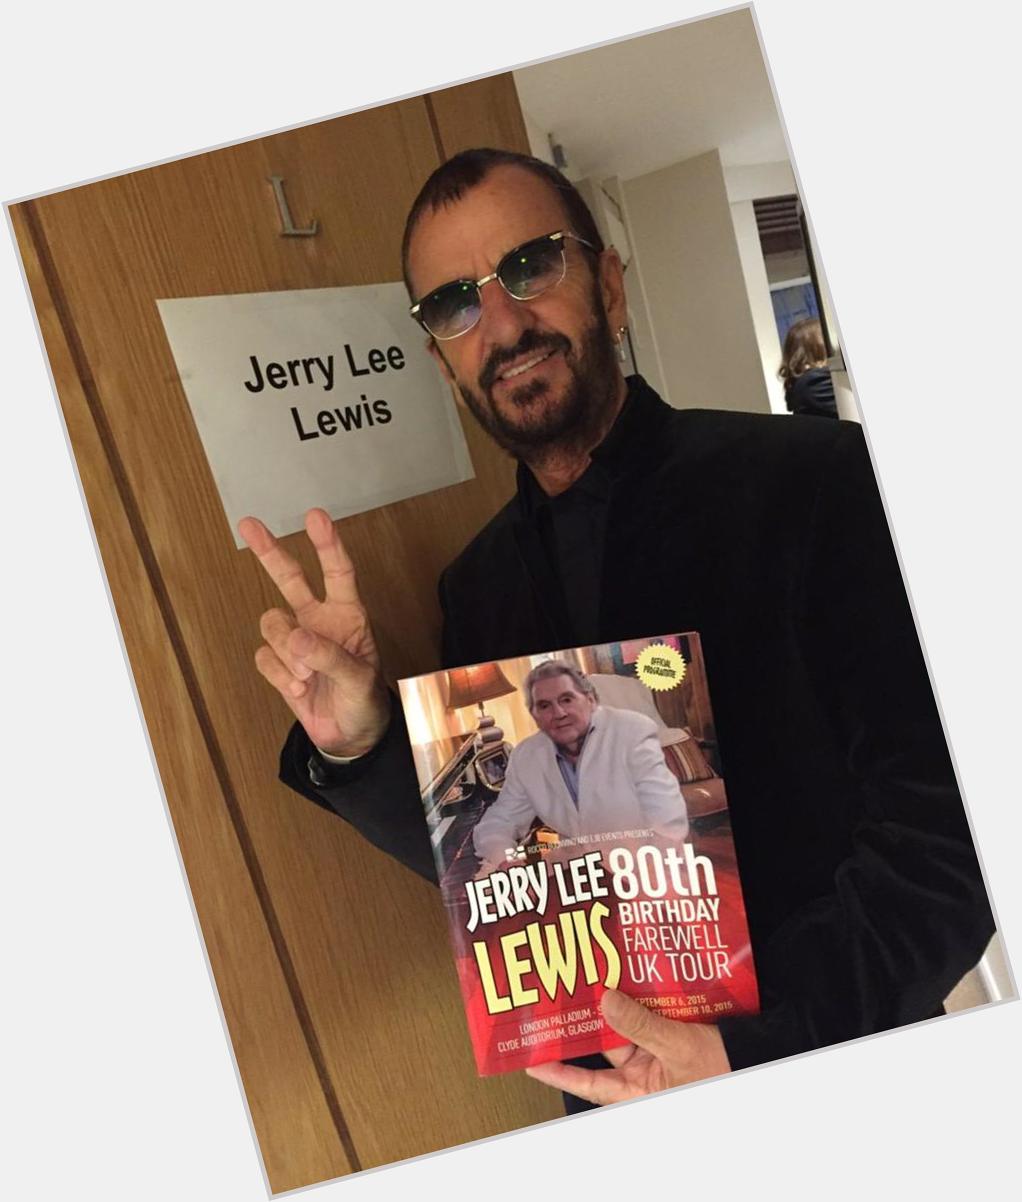 Had a great time at the Jerry Lee Lewis show in London happy birthday Jerry peace and loveRx       